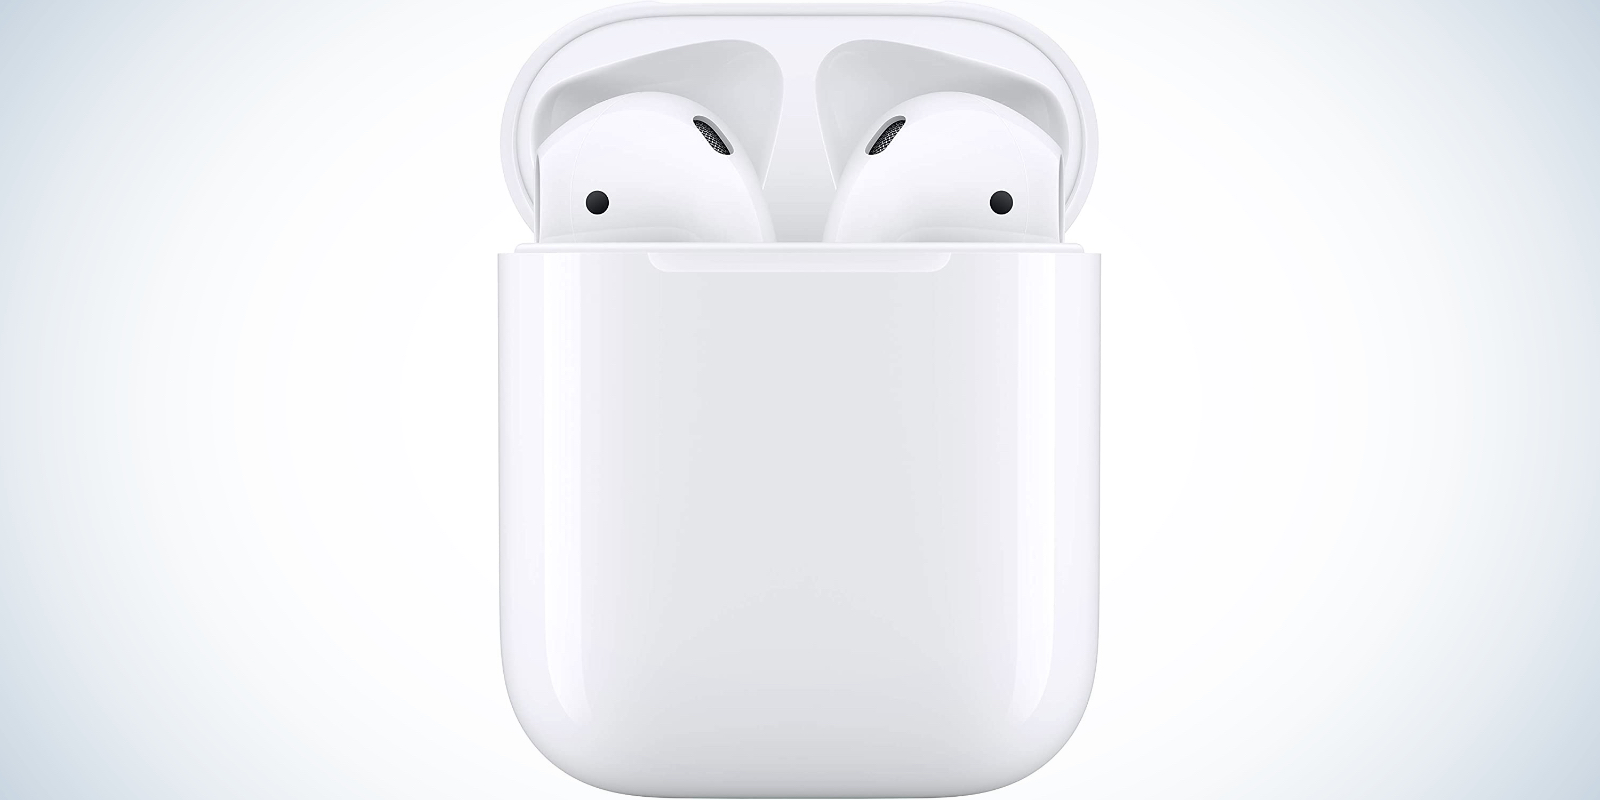 You can score Apple’s AirPods 2 for just $89 during the Amazon Prime Early Access Sale